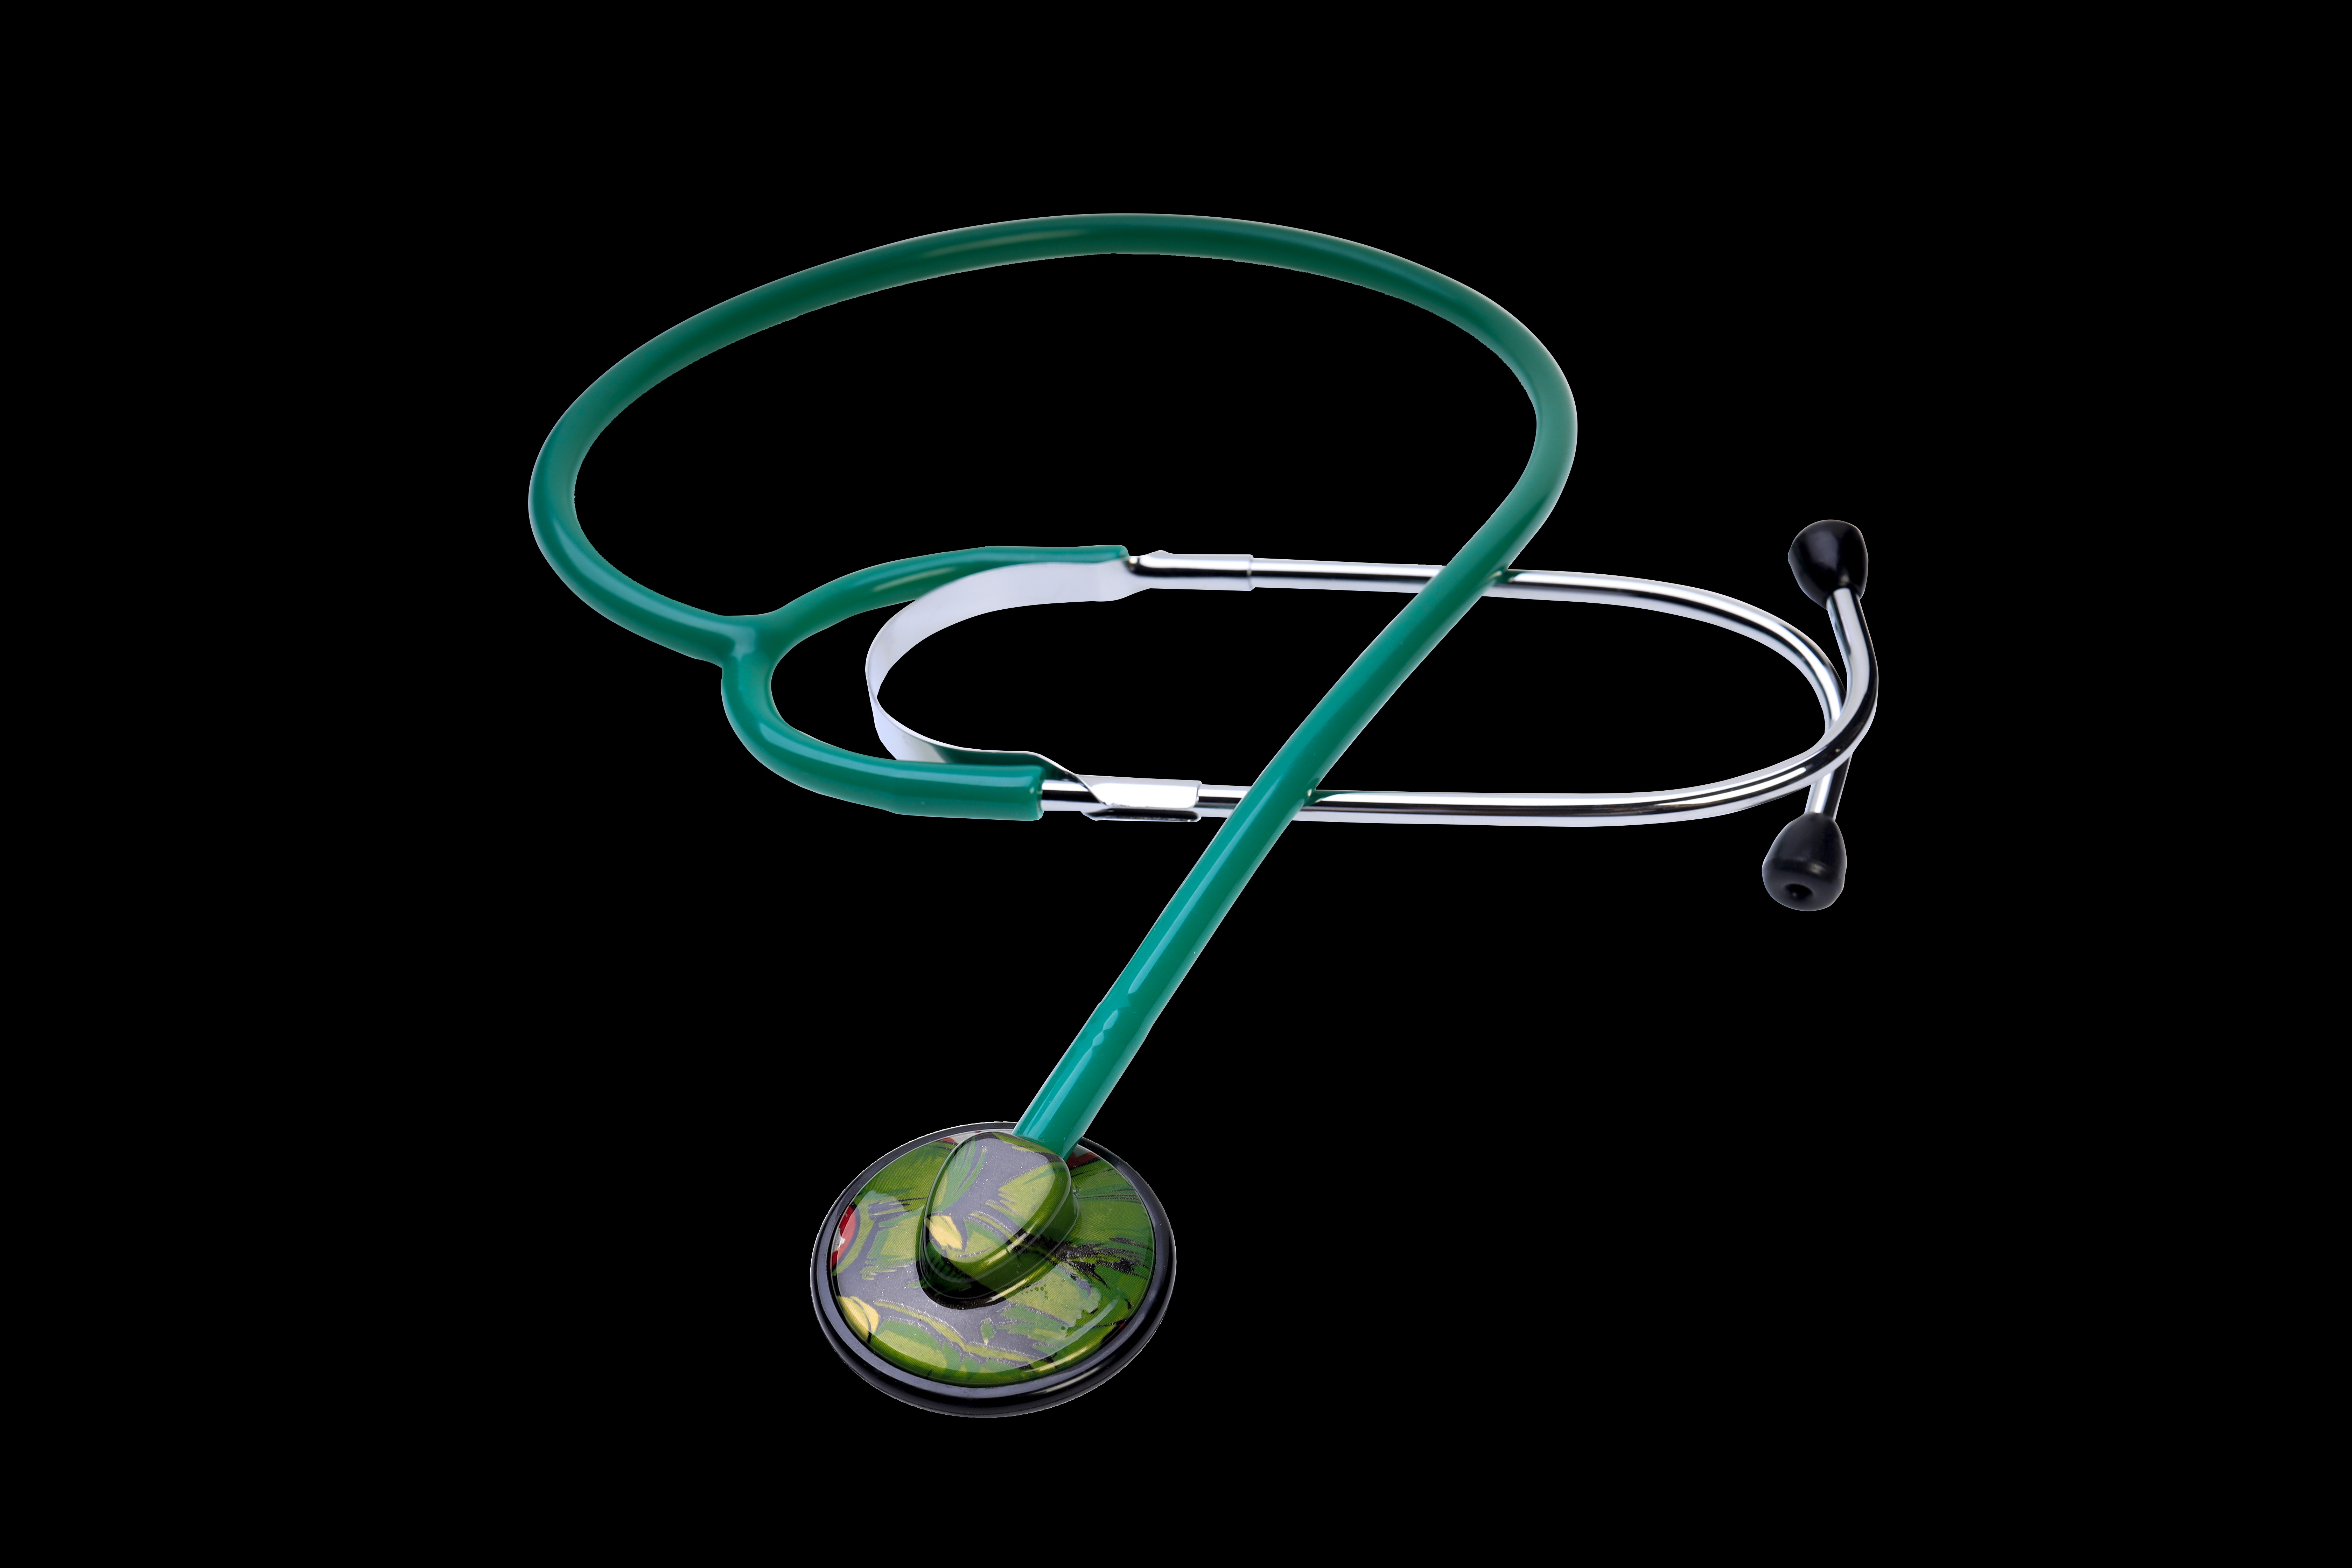 SW-ST55 Medical Equipment Single Head Two Diaphragm Colorful Veterinary Stethoscope With Hard Case For Student Adult